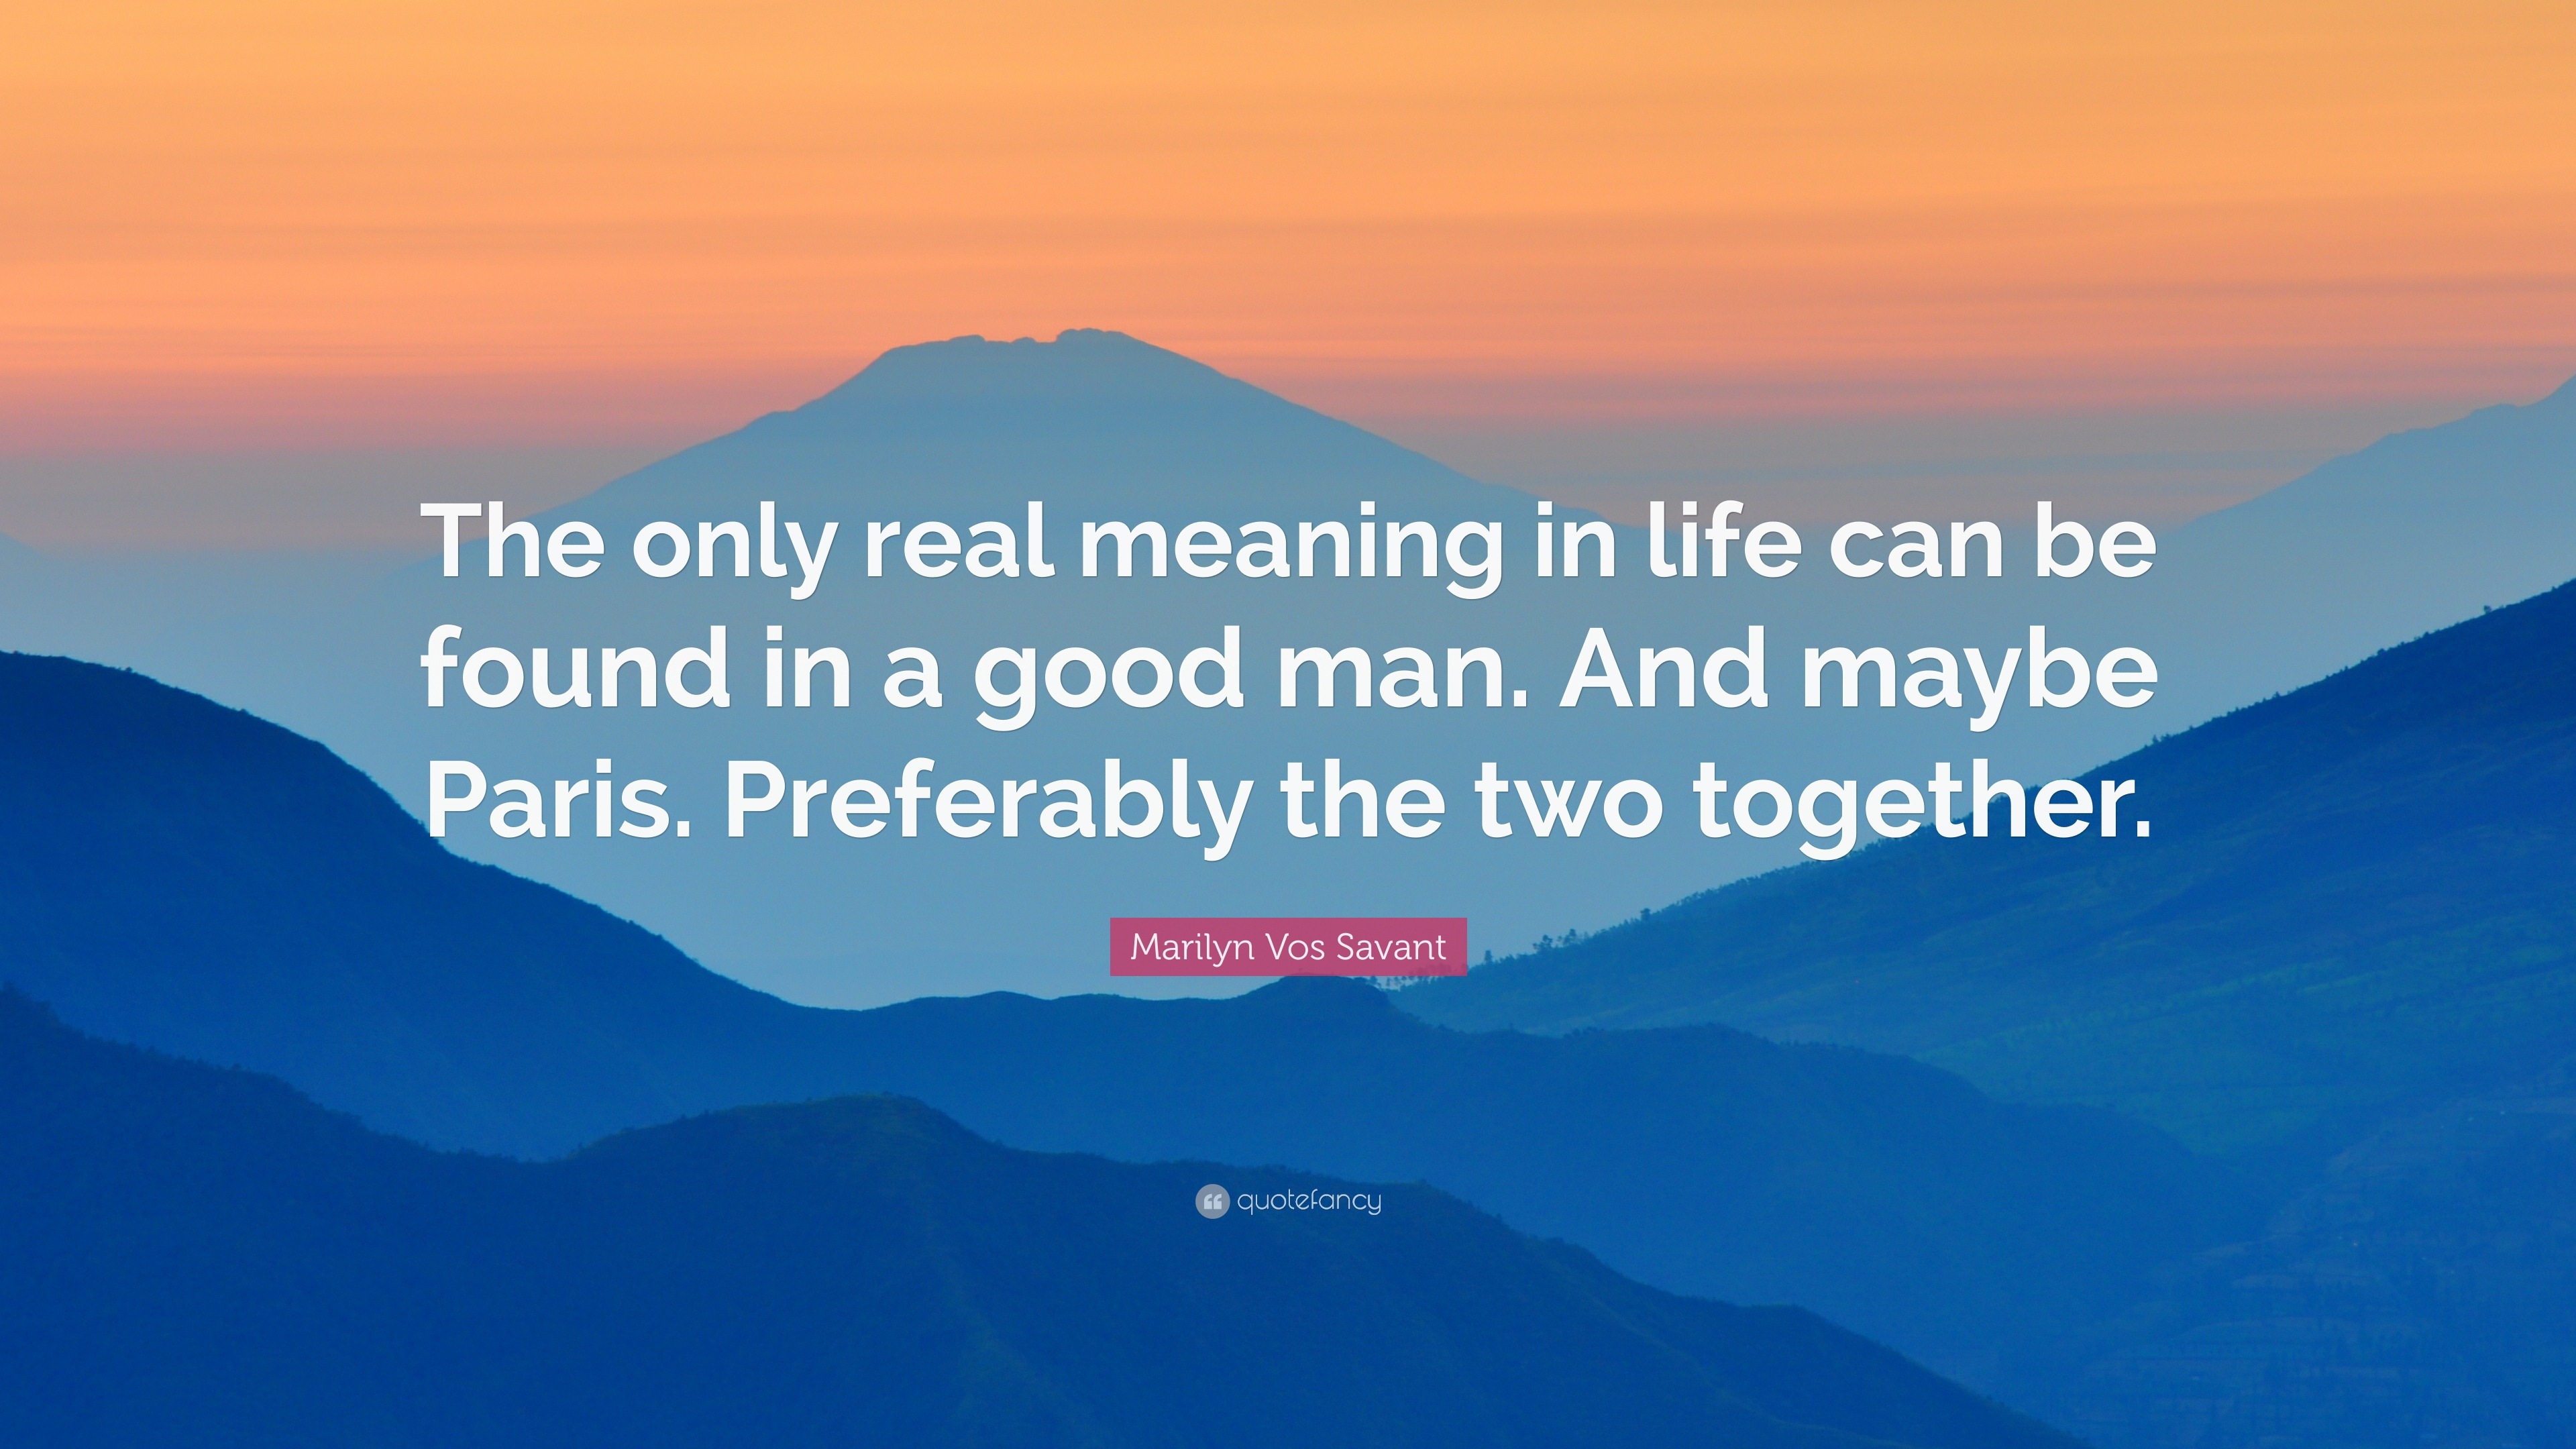 Marilyn Vos Savant Quote: “The only real meaning in life can be